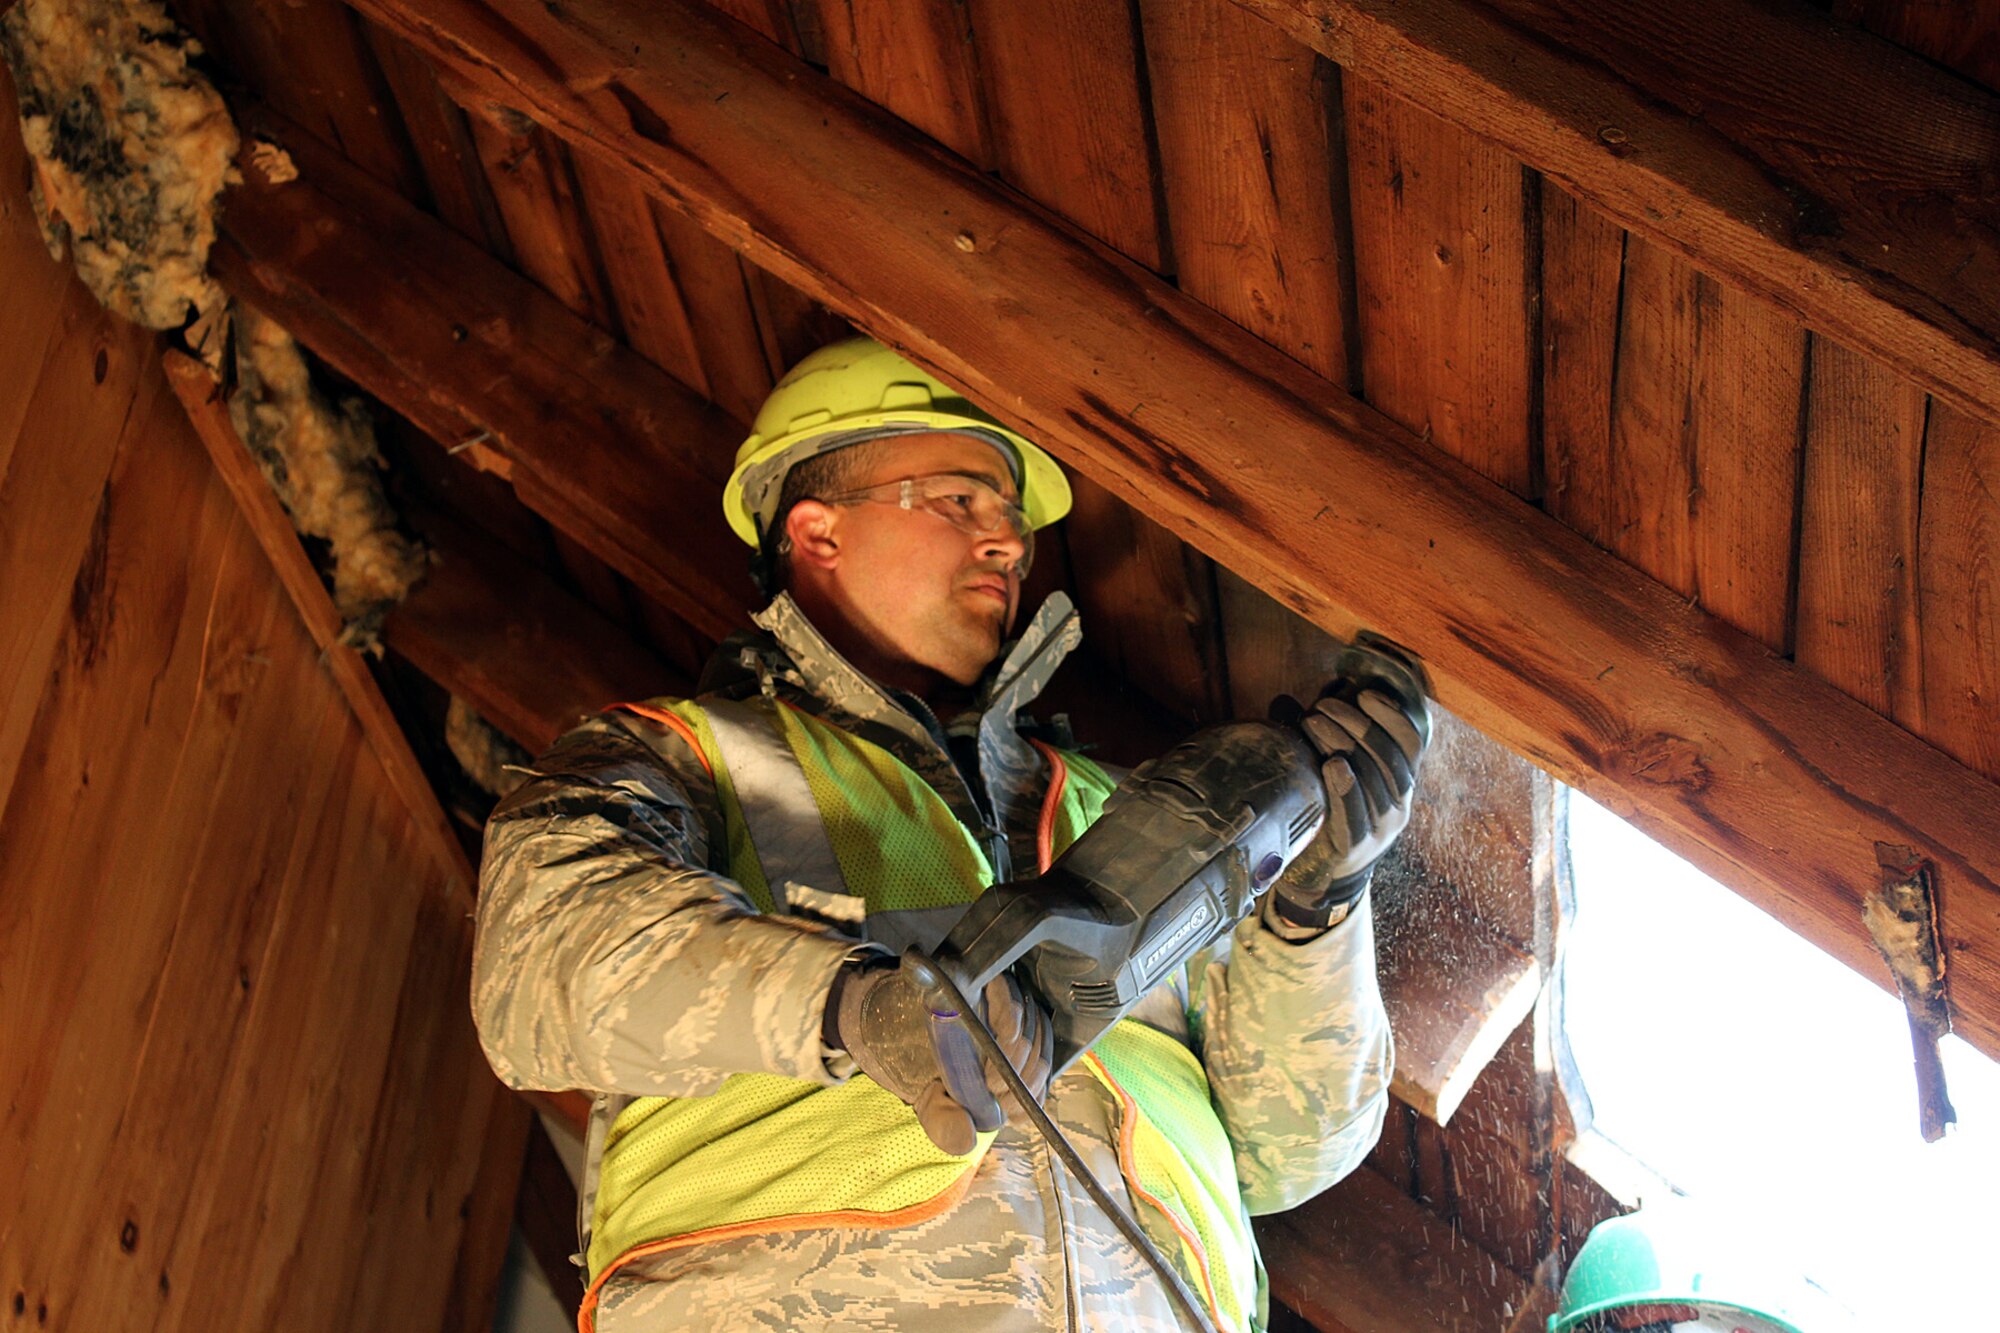 140528-Z-VA676-087  Staff Sgt. Richard Sanchez cuts out a piece of the roof of a building to prepare for an addition at Camp Hinds Boy Scout camp, Raymond, Maine, May 28, 2014. Sanchez, a member of the 127th Civil Engineer Squadron, Selfridge Air National Guard Base, Mich., is part of an Innovative Readiness Training mission at the camp, which allows military personnel to get training in various tasks and a community organization, in this case the Boy Scouts, to benefit from the work. Air National Guard, Marine and Army Reserve units from about a dozen different states will be working on a construction project at the camp during summer 2014. (U.S. Air National Guard photo by Technical Sgt. Dan Heaton)
